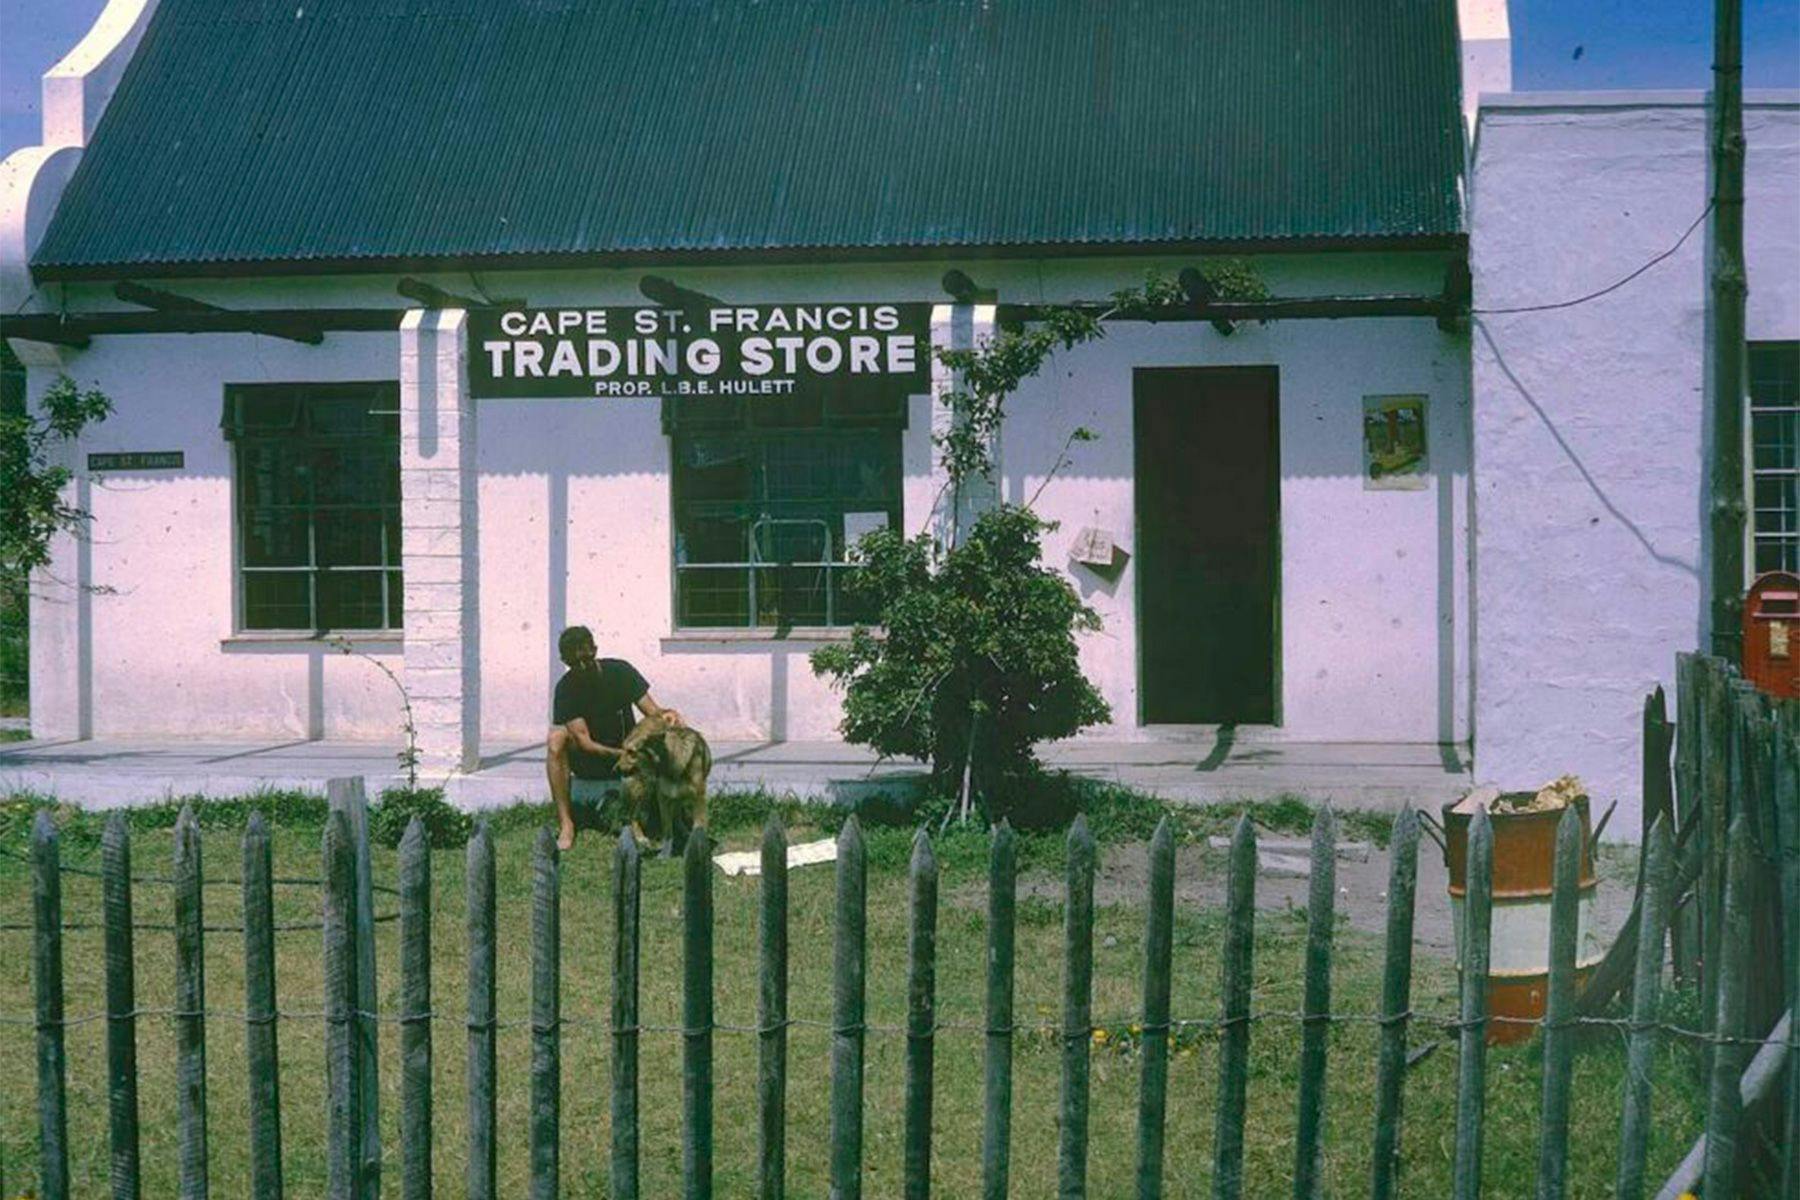 dick metz outside cape st francis trading store, south africa, 1959